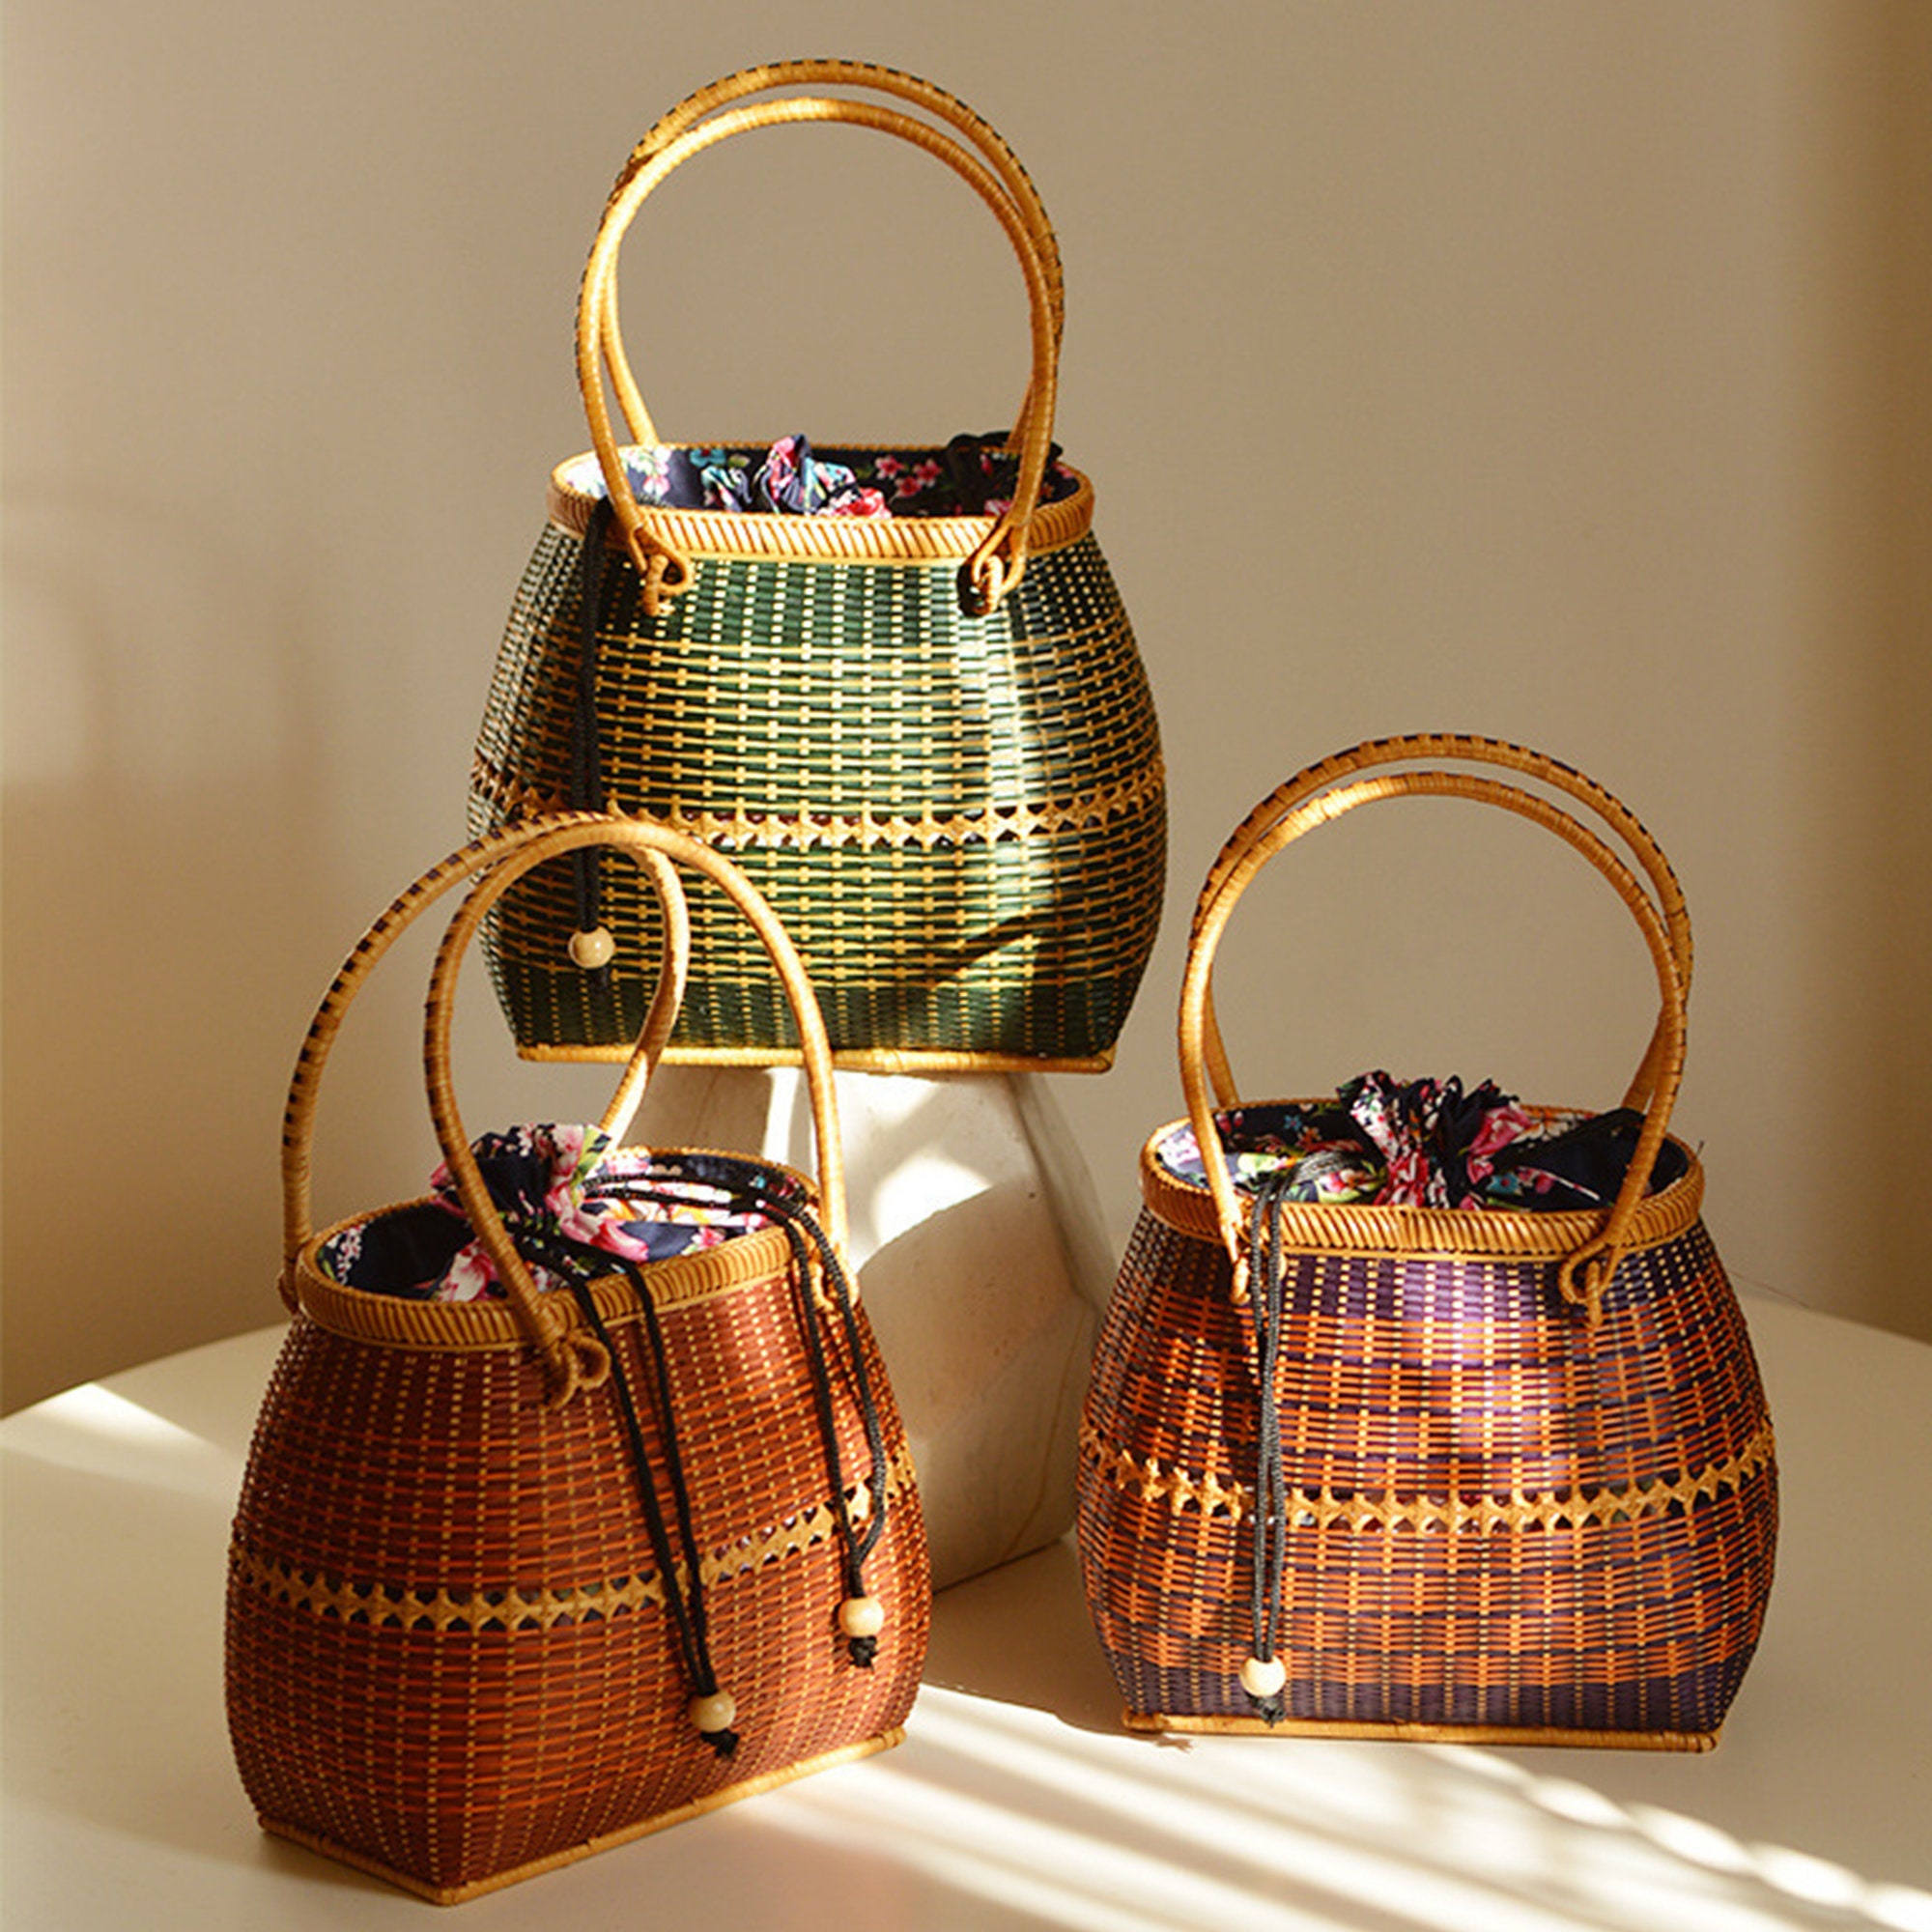 Handwoven Bamboo Handbag of square shape with leather straps and